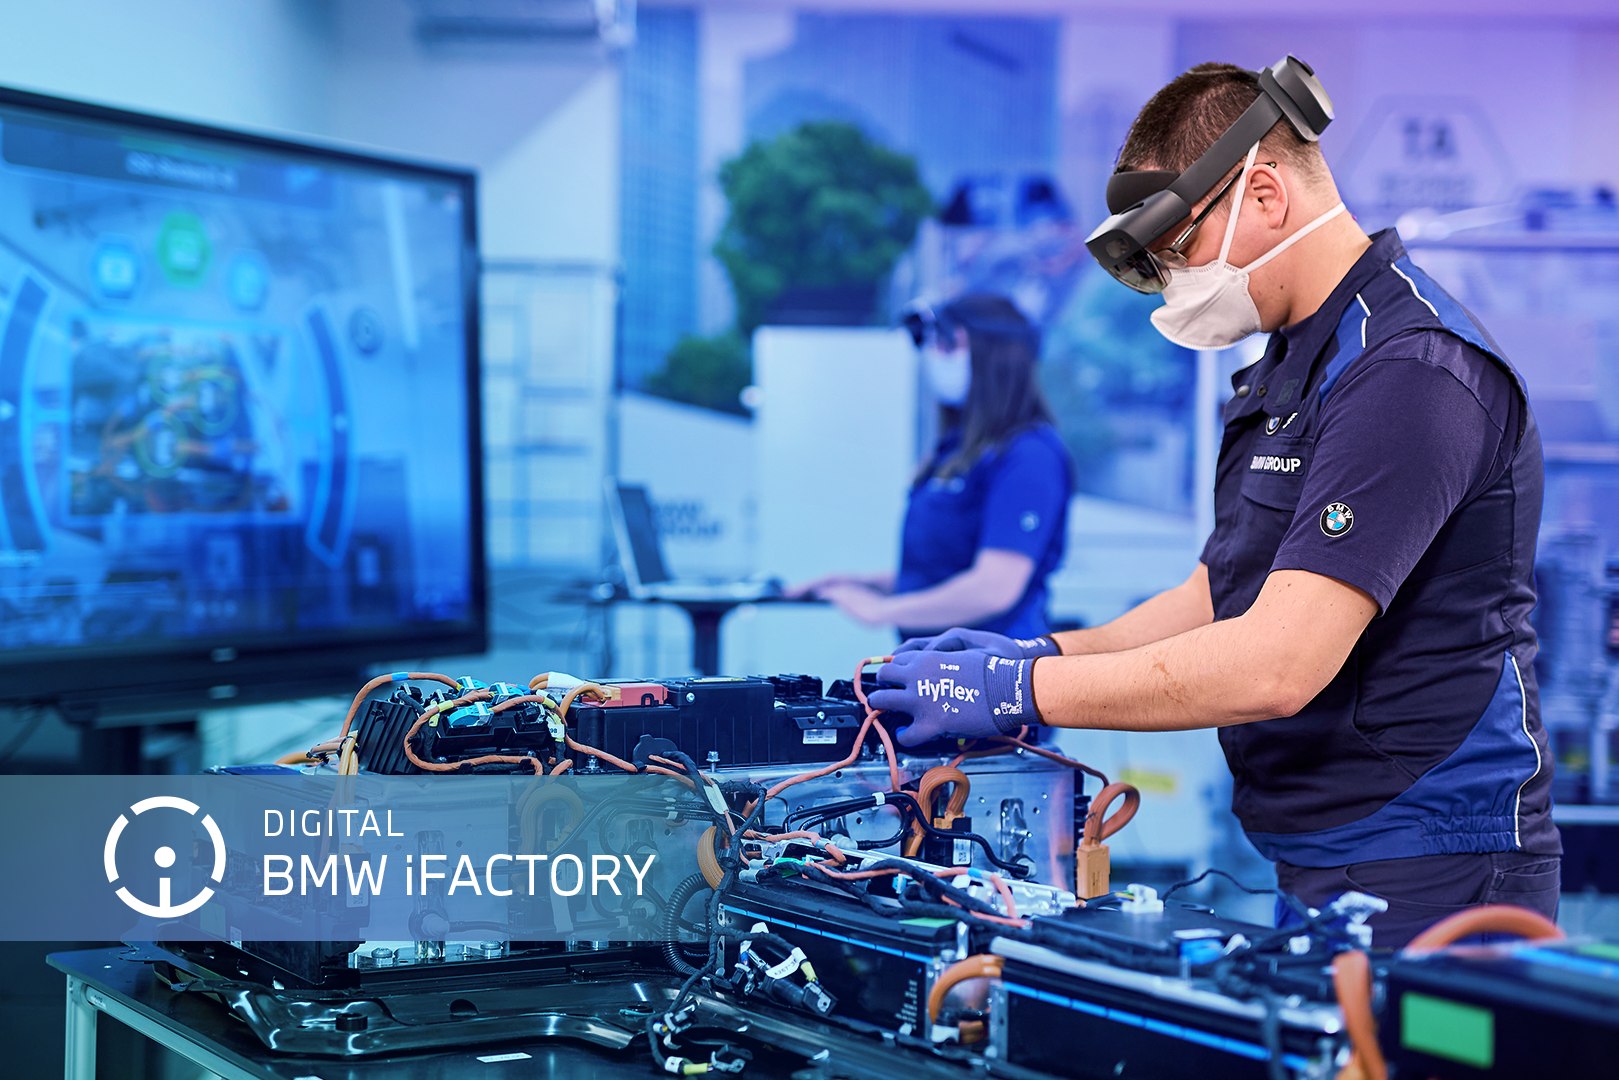 This is how DIGITAL the BMW <span class="grp-lowercase">i</span>FACTORY is.